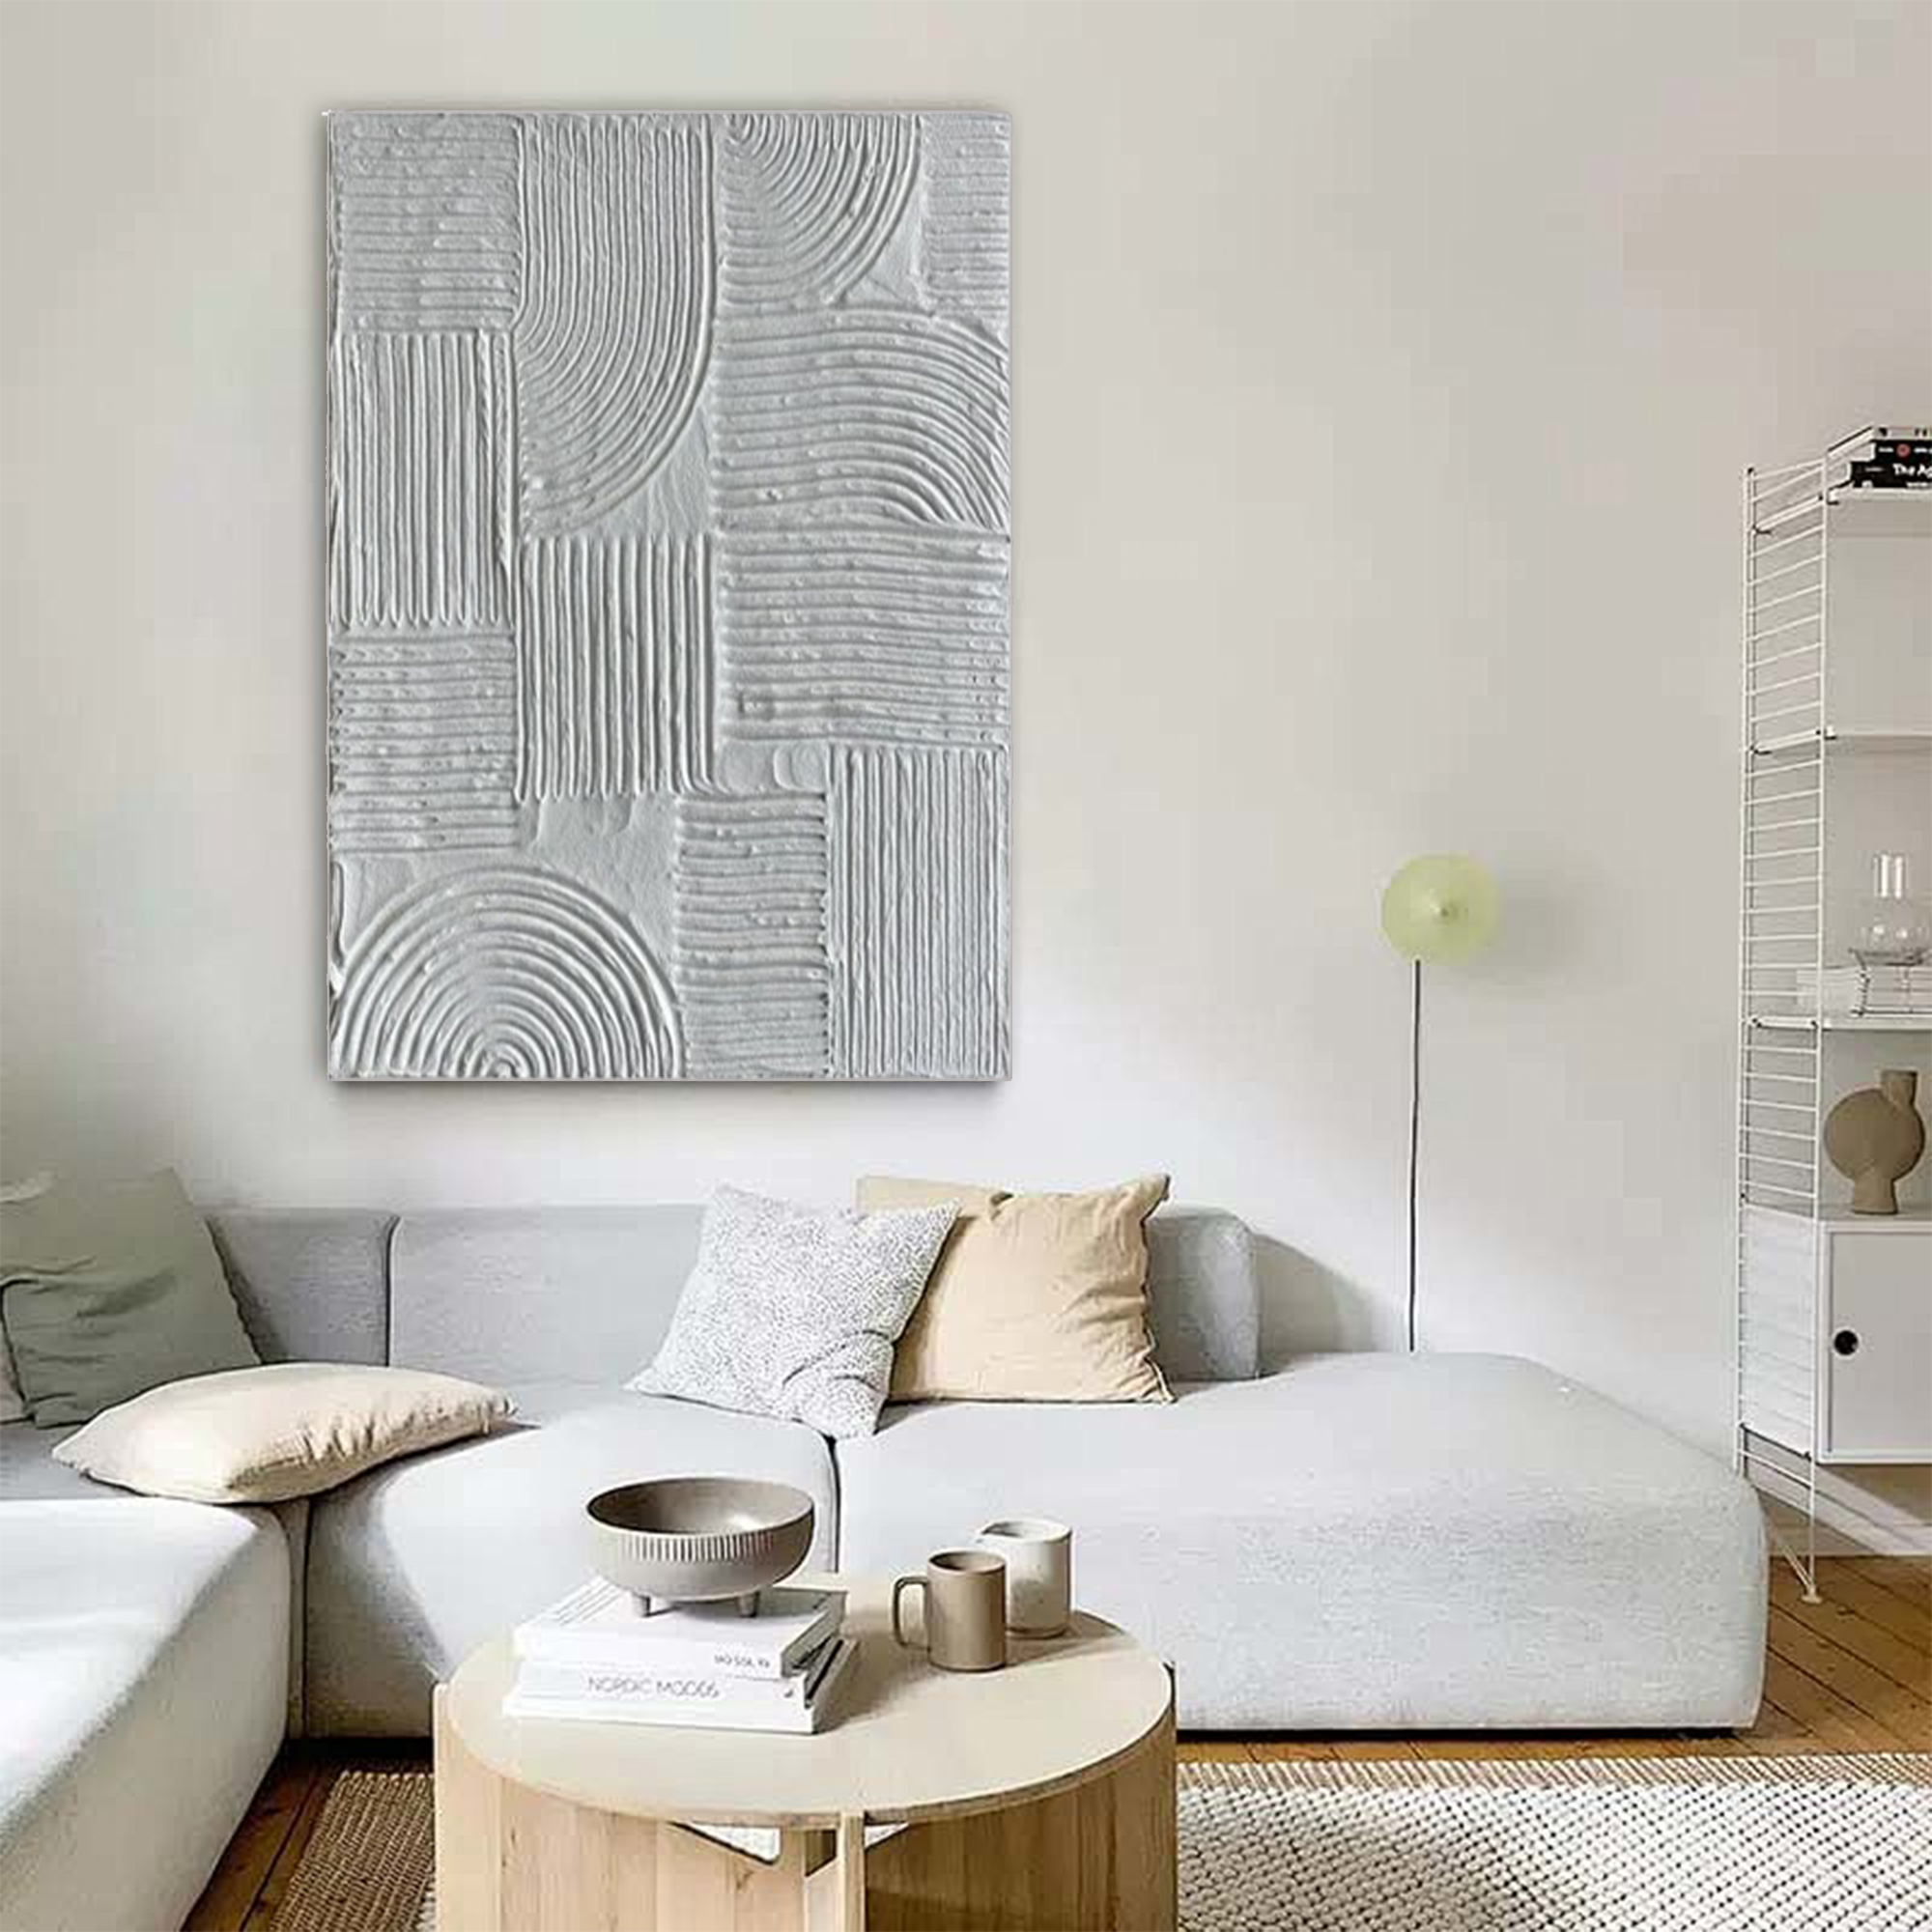 White Textured Minimalist Painting "Echoes"